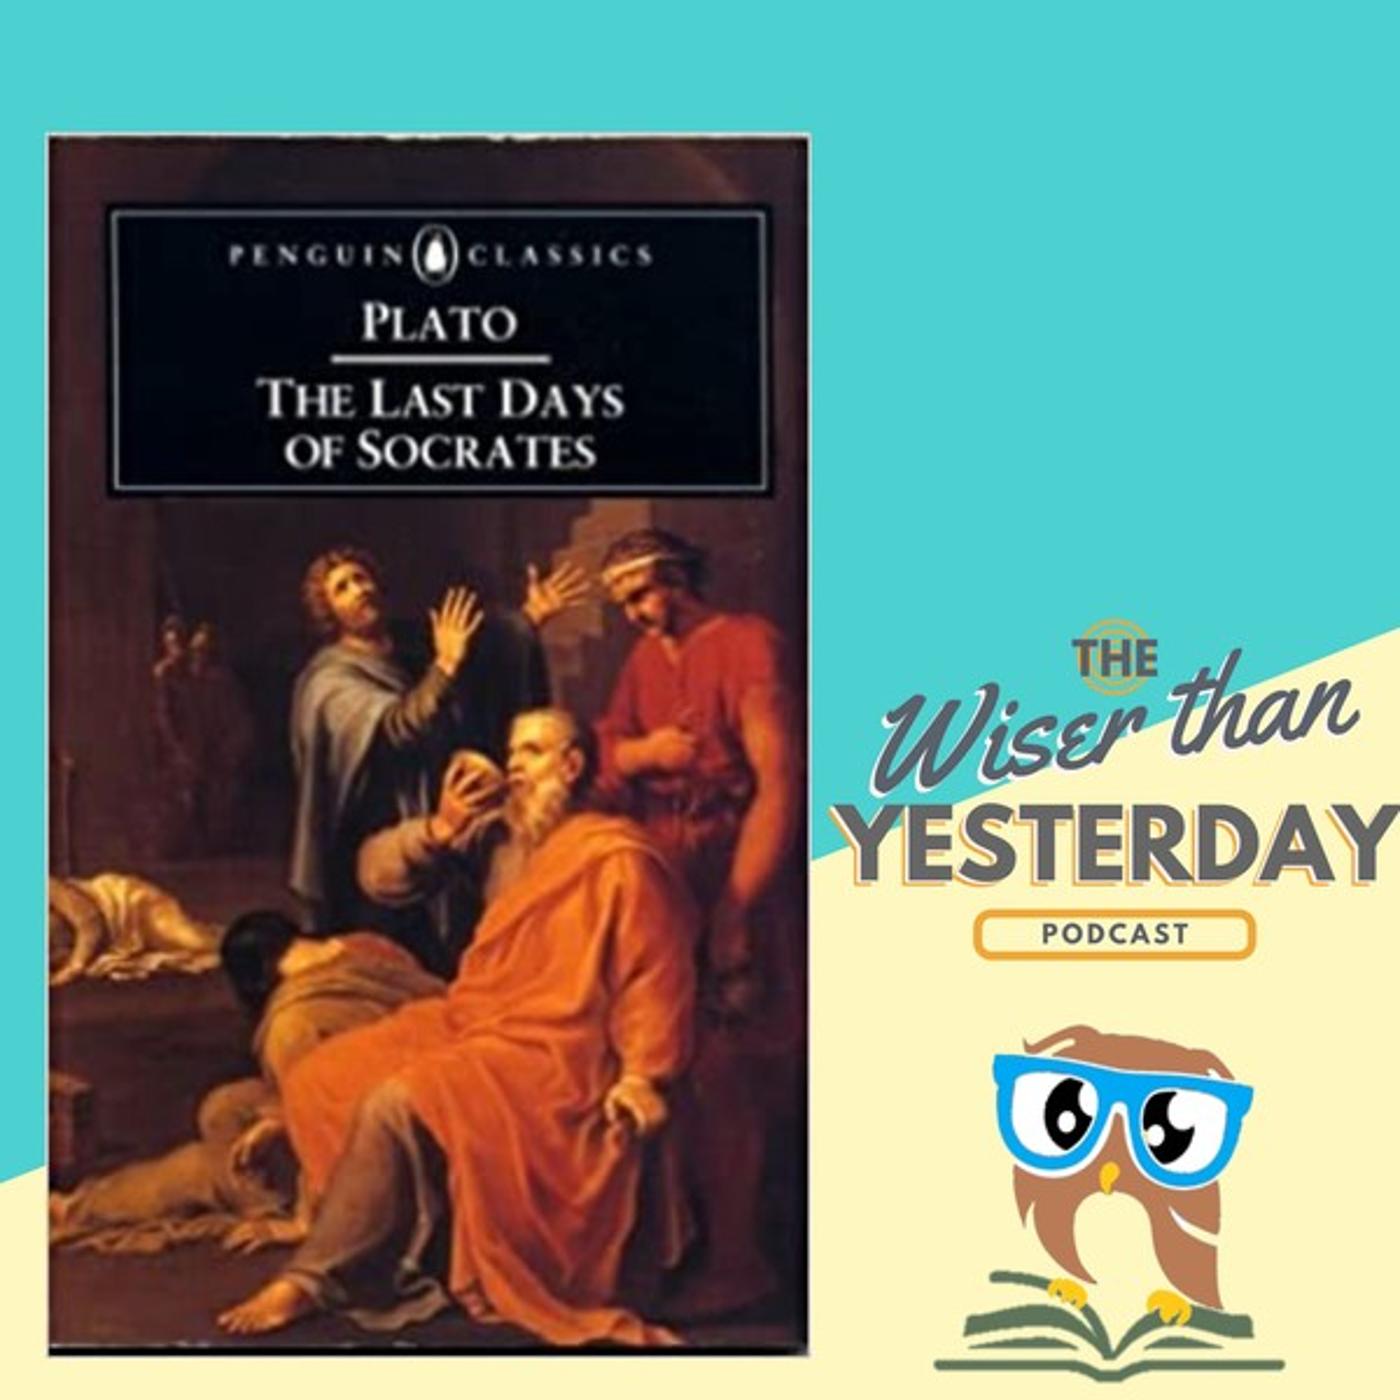 The final days of Socrates - Plato